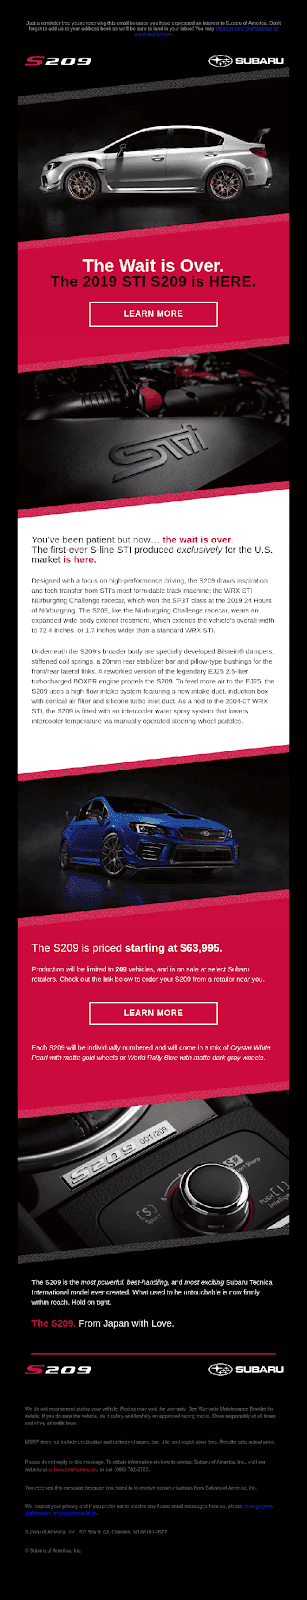 Subaru product launch email